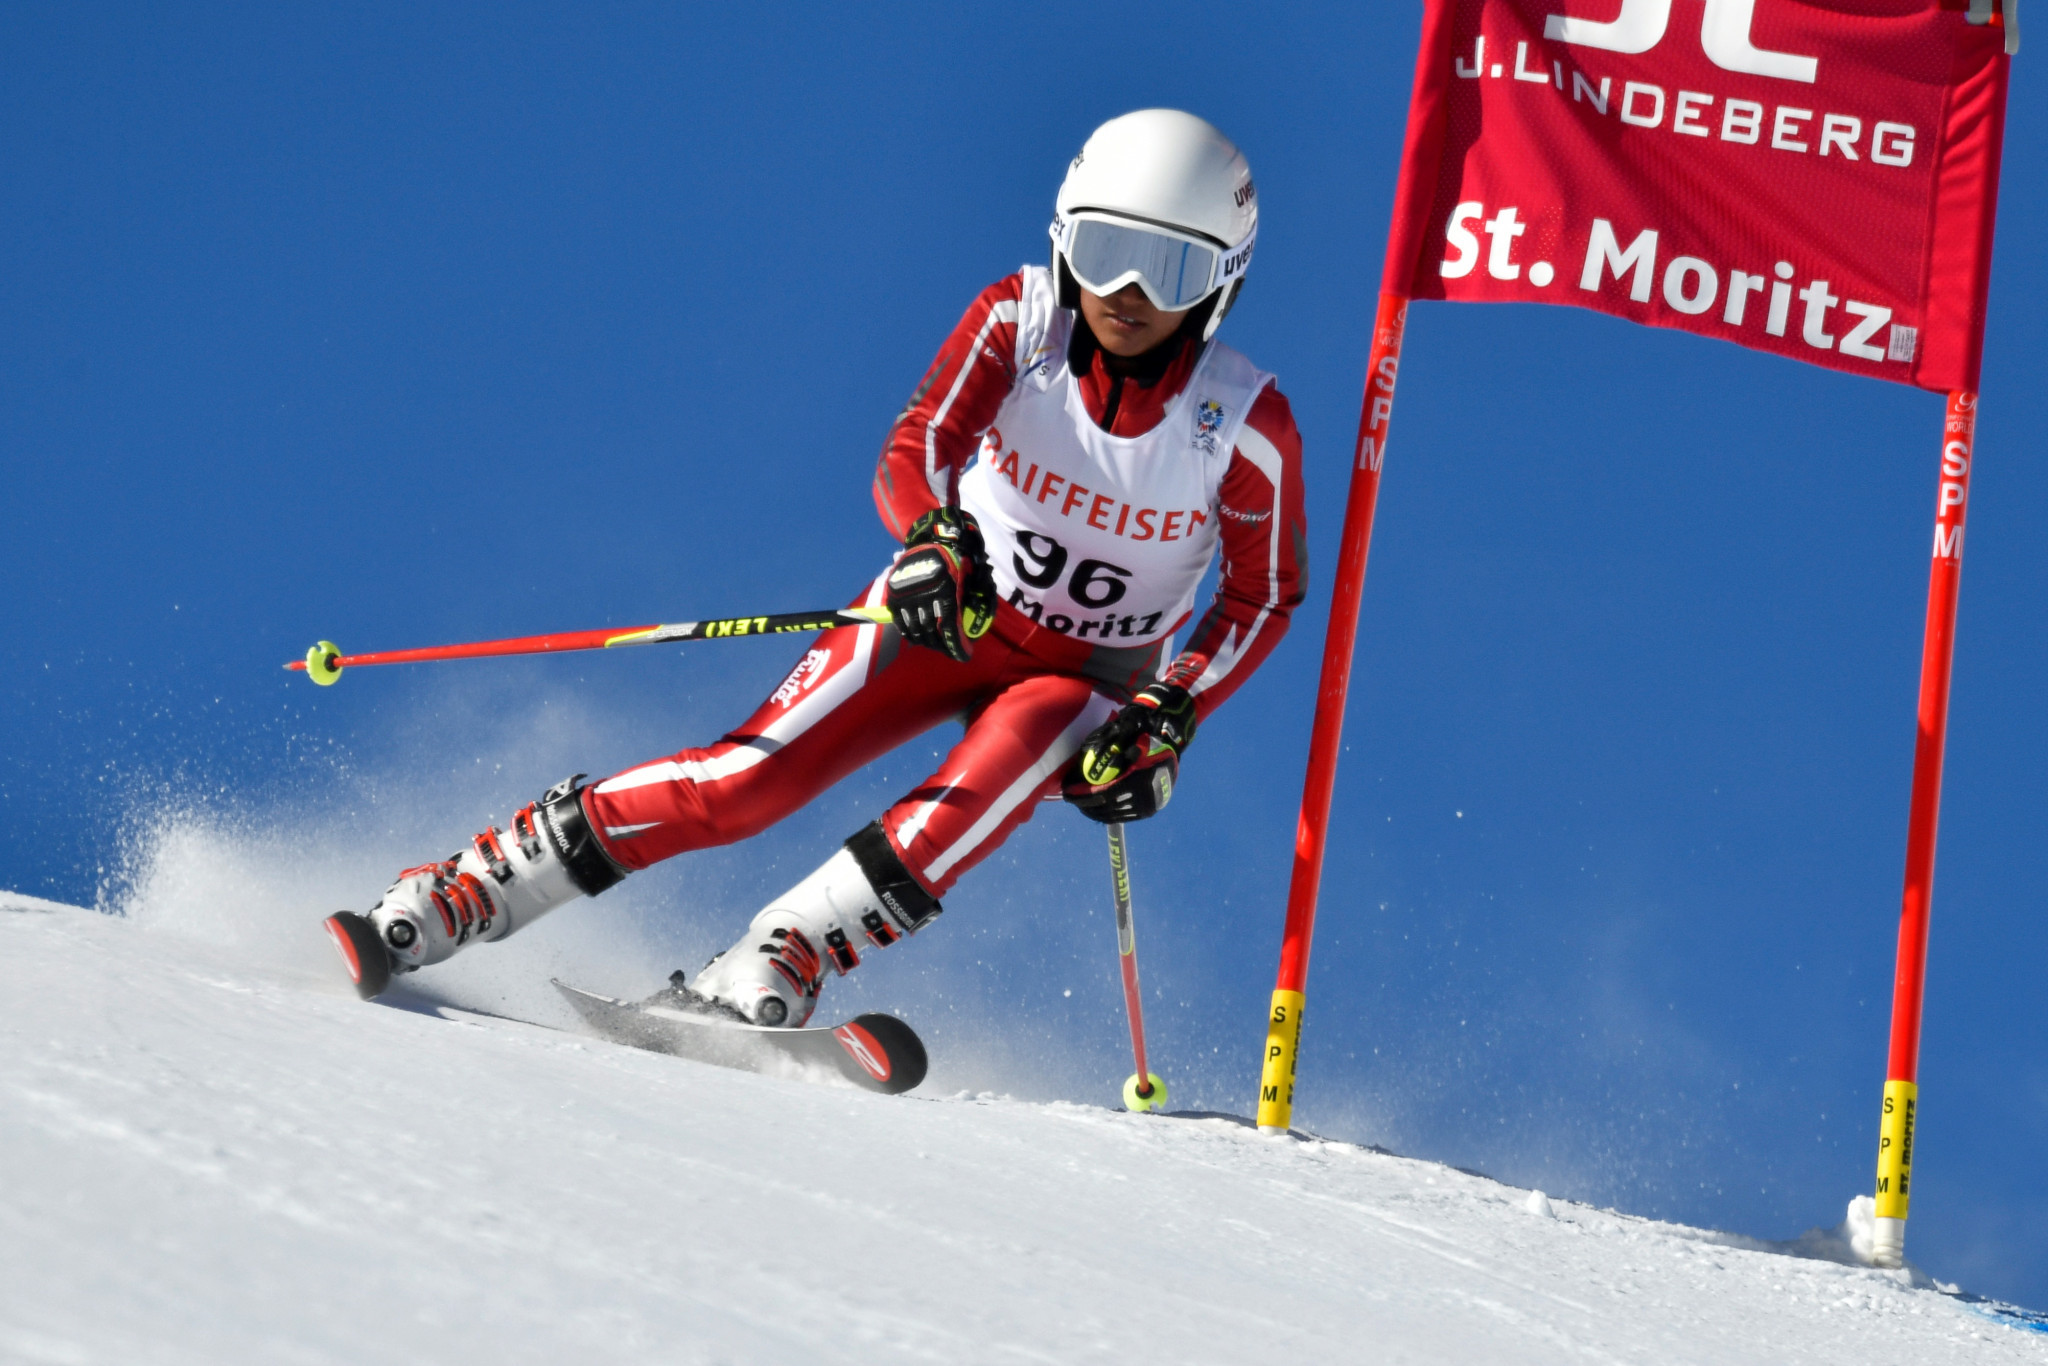 Aanchal Thakur won India's first-ever international skiing medal in January ©Getty Images